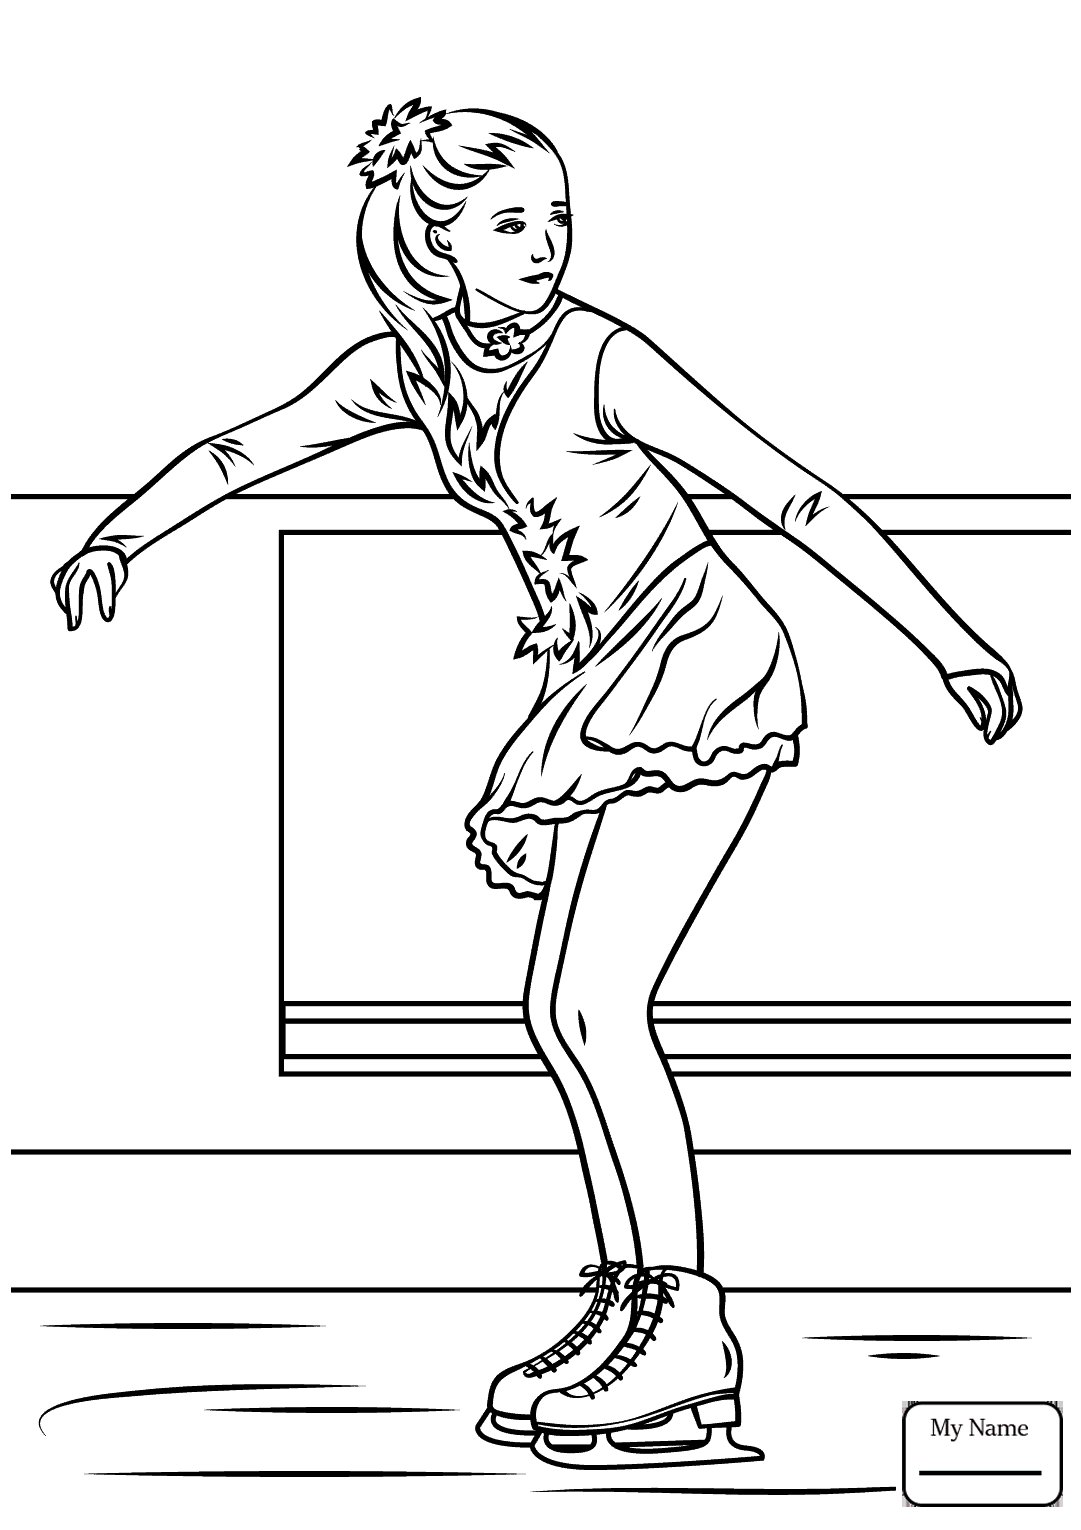 Figure skating winter olympics coloring pages coloring pages winter coloring pages for kids coloring pages